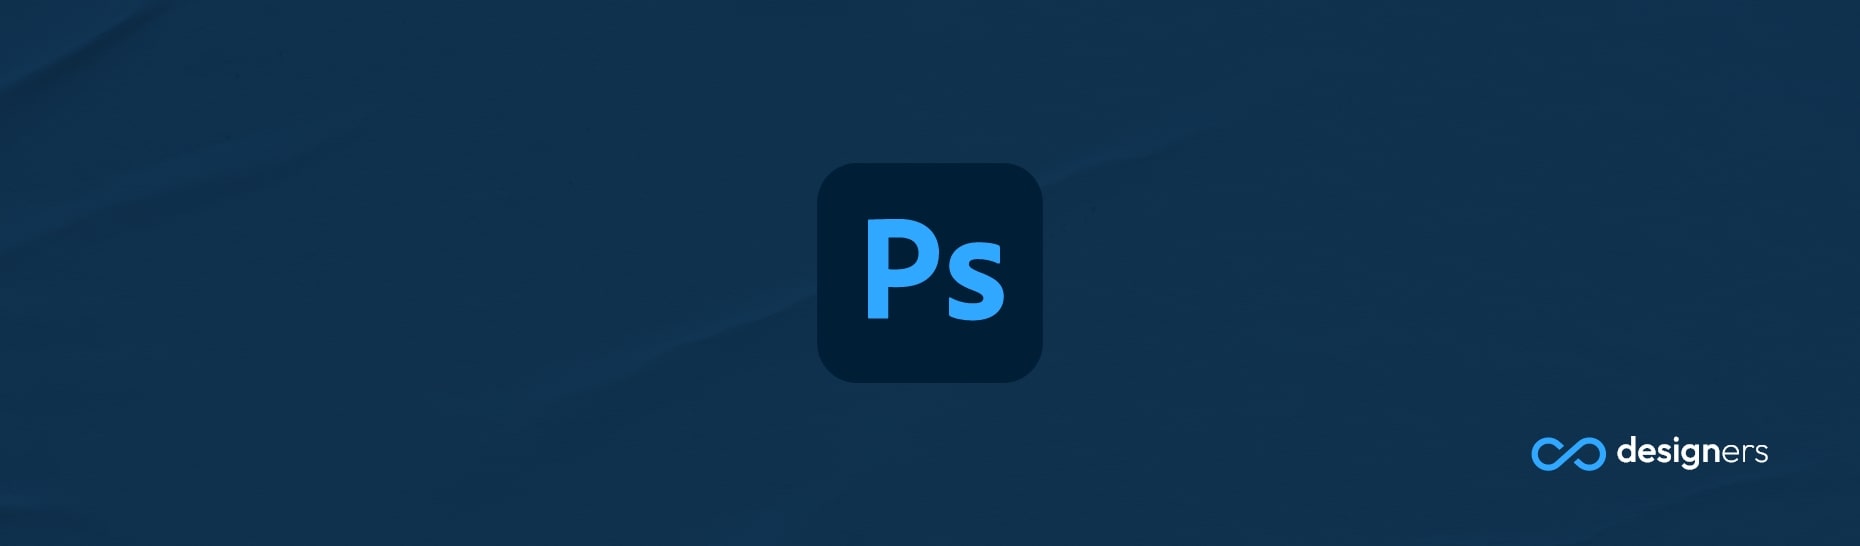 Can You Buy Photoshop Without Paying Monthly?